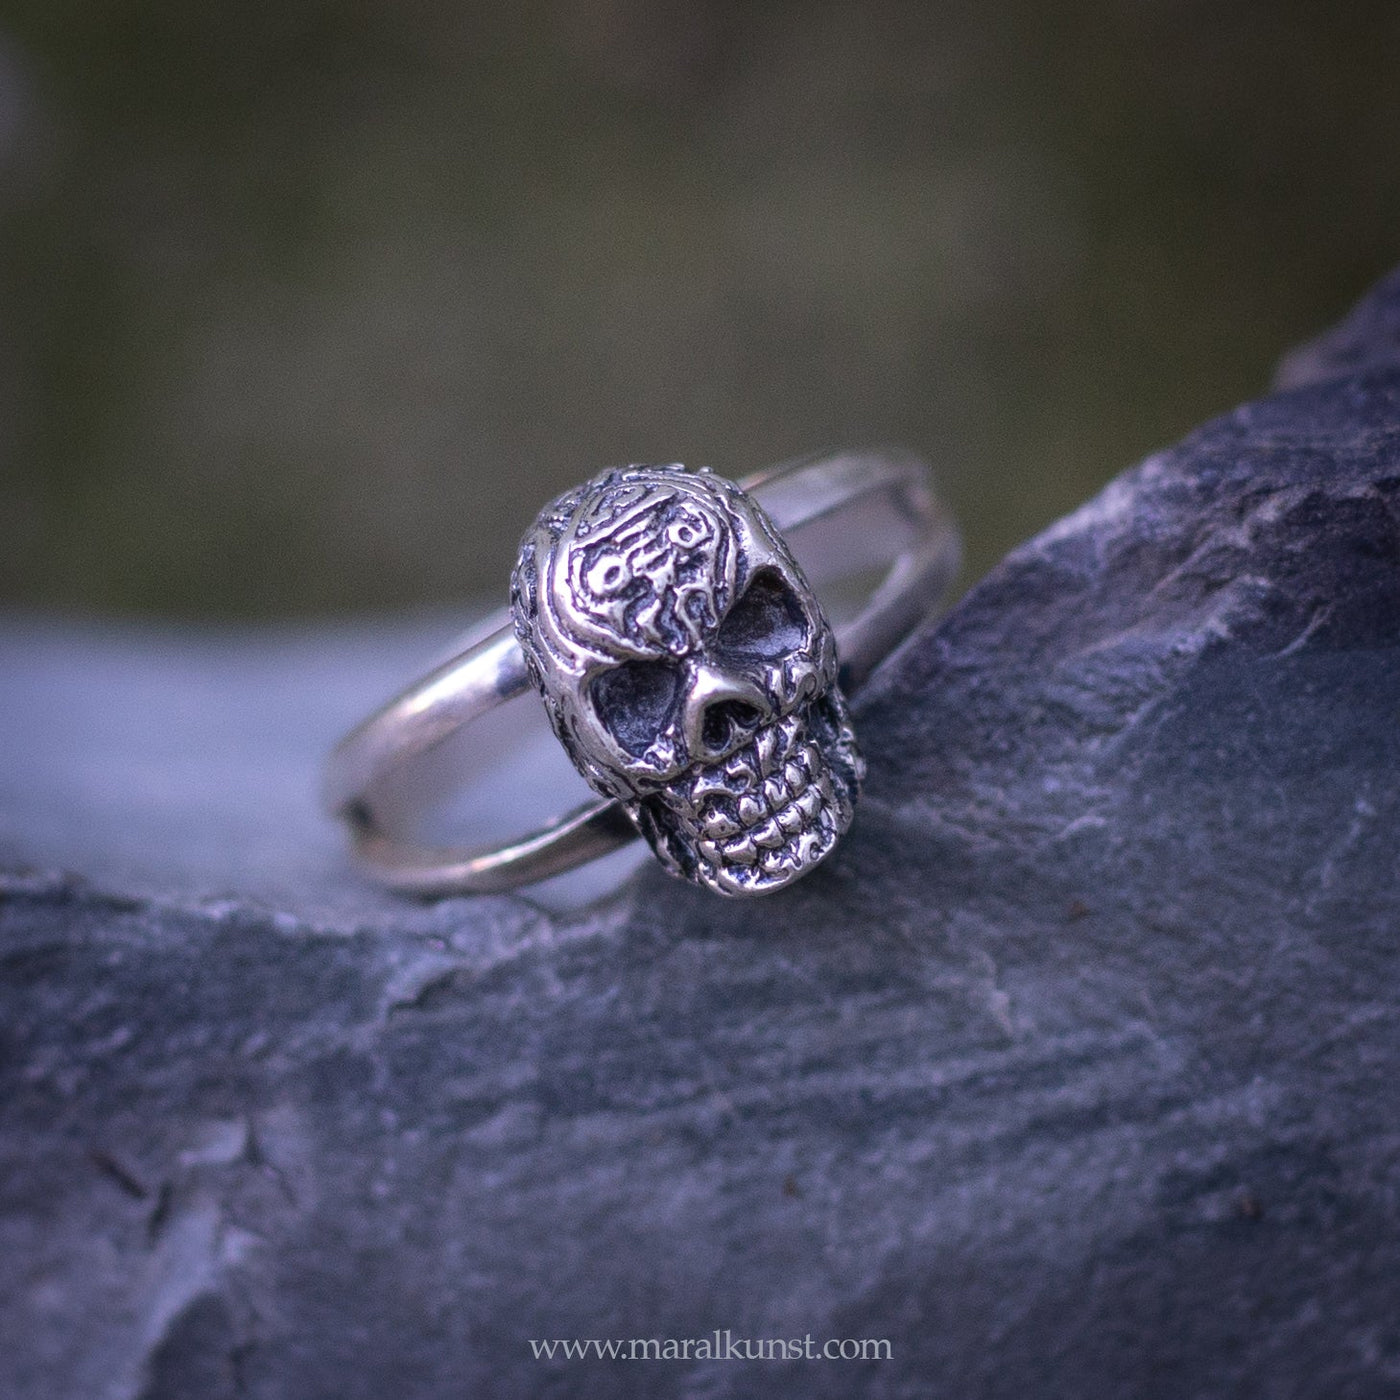 Mexican Skull Ring in Silver - Maral Kunst Jewelry